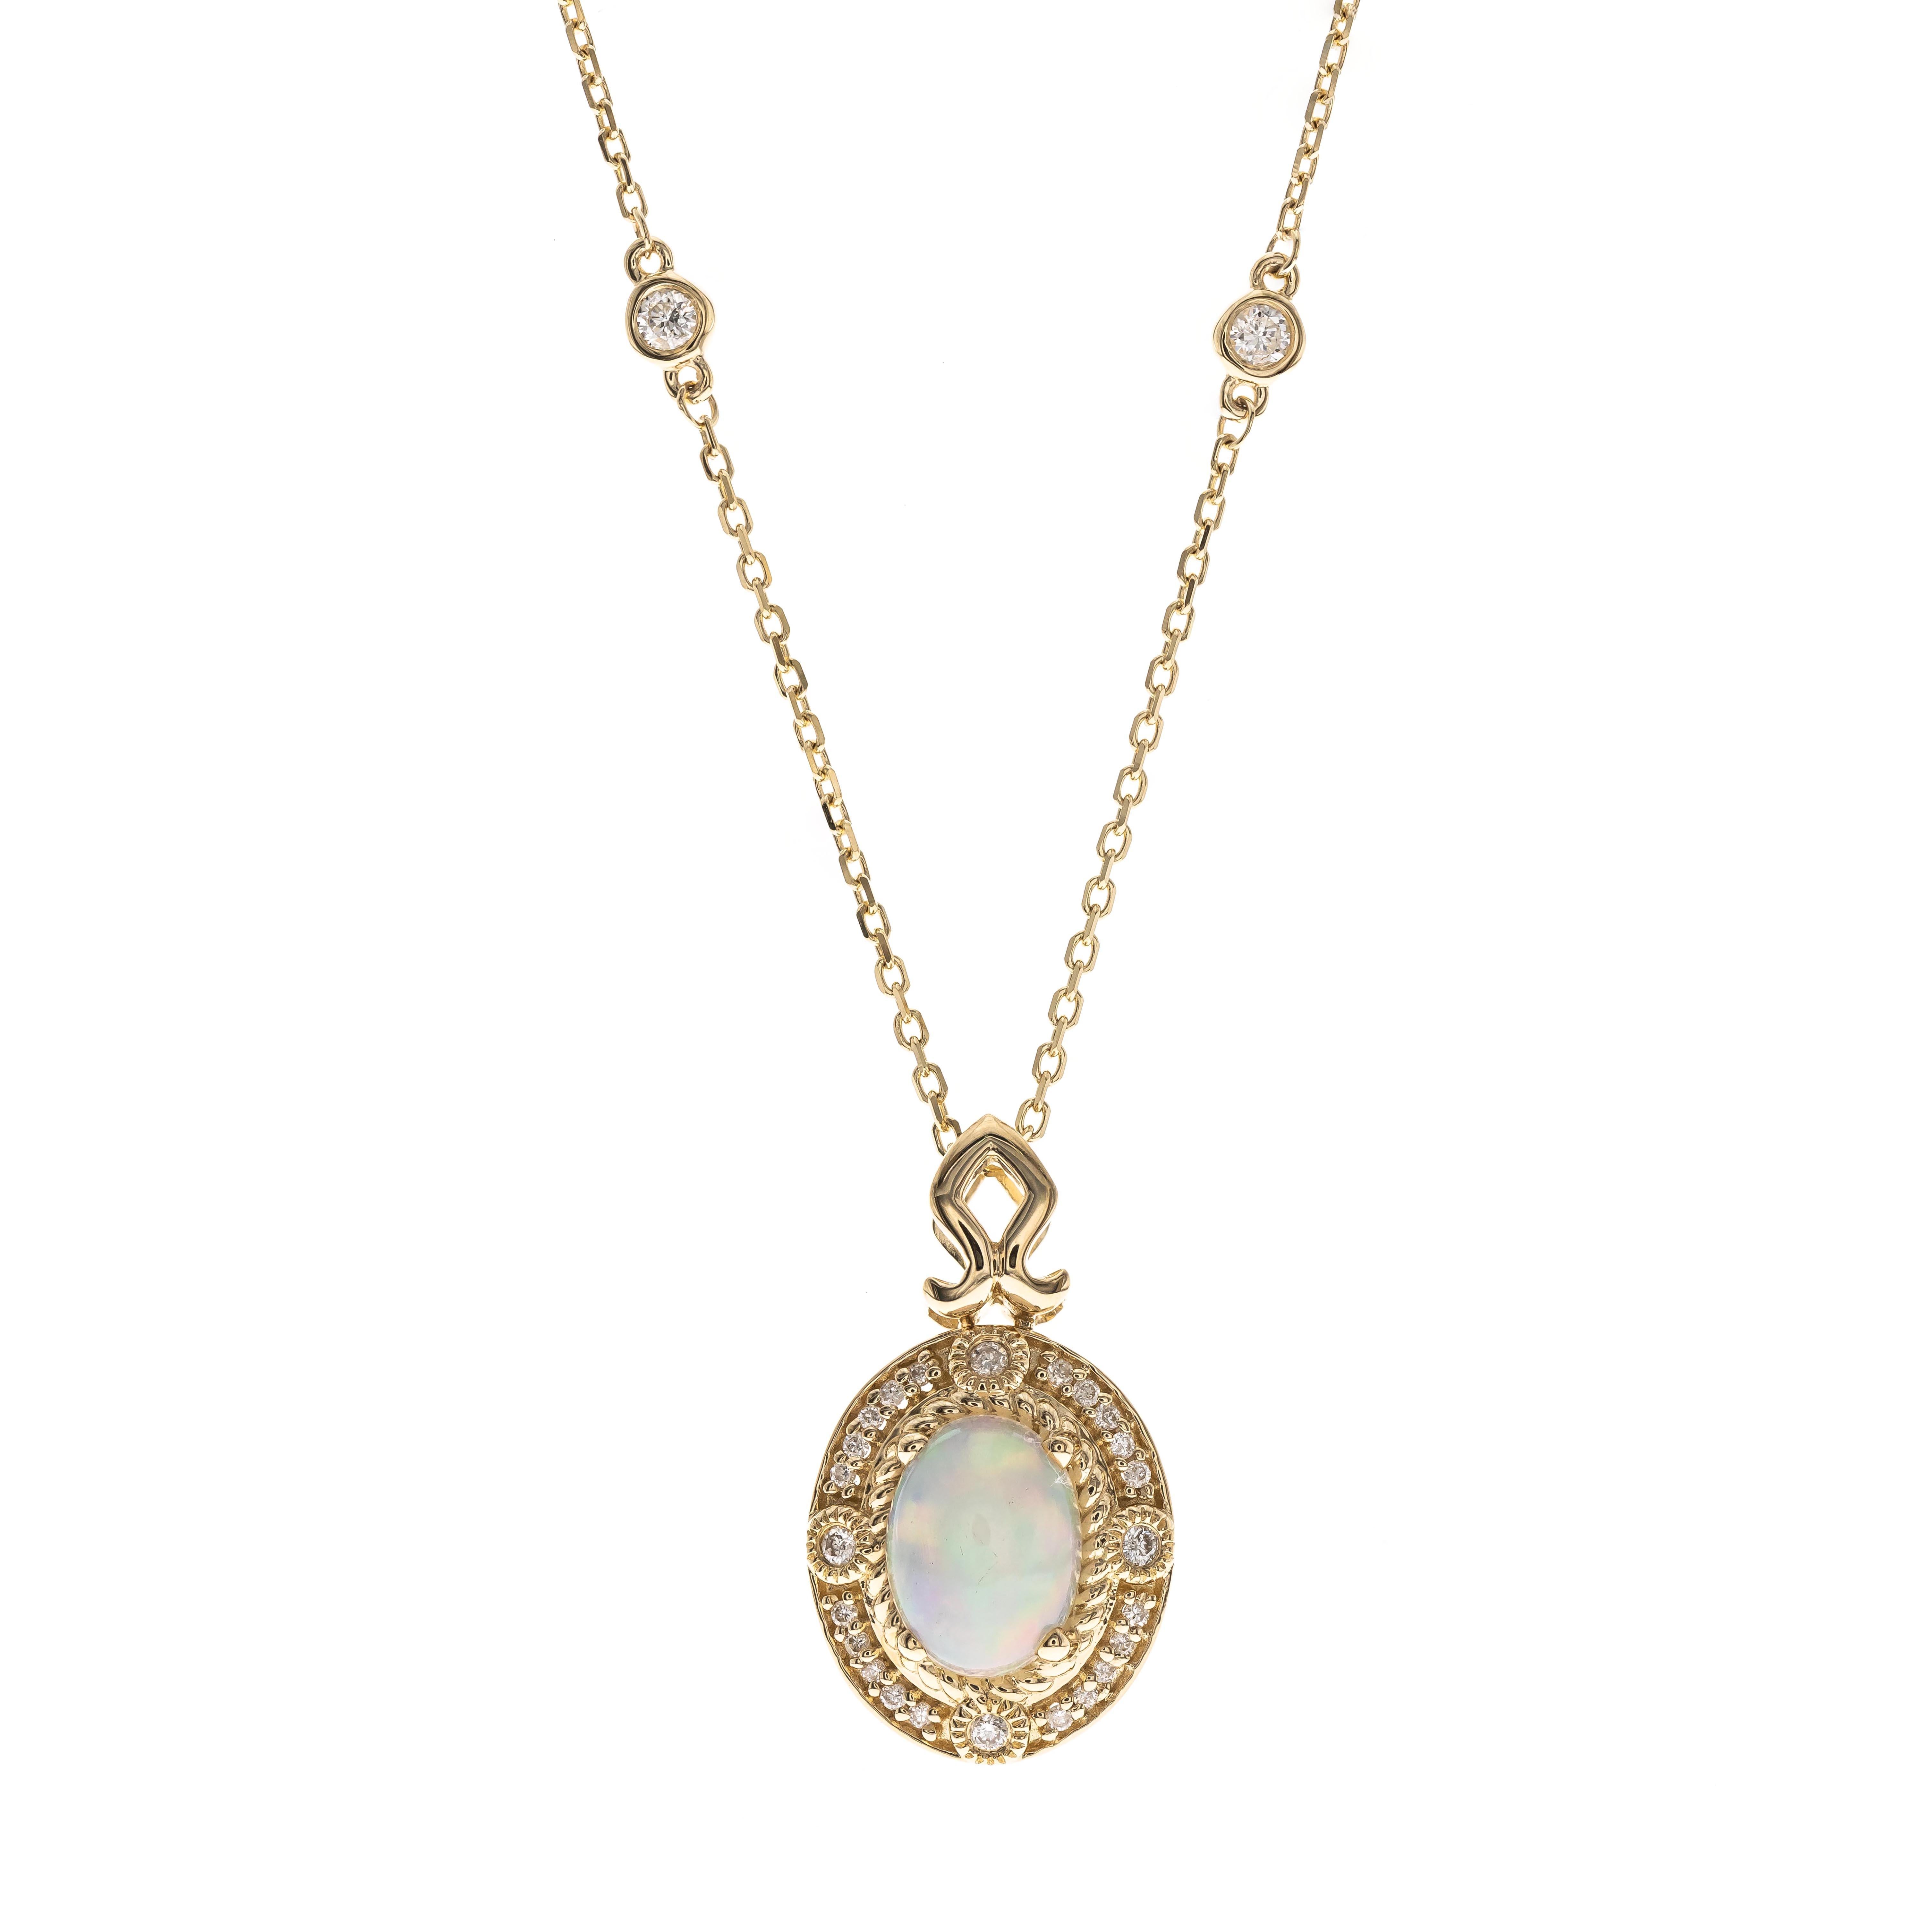 This beautiful Natural Opal Pendant is crafted in 14-karat Yellow gold and features a 0.81 carat 1 Pc Natural Opal and 24 Pcs Round White Diamonds in GH- I1 quality with 0.09 Ct in a prong-setting. This Pendant comes in 18